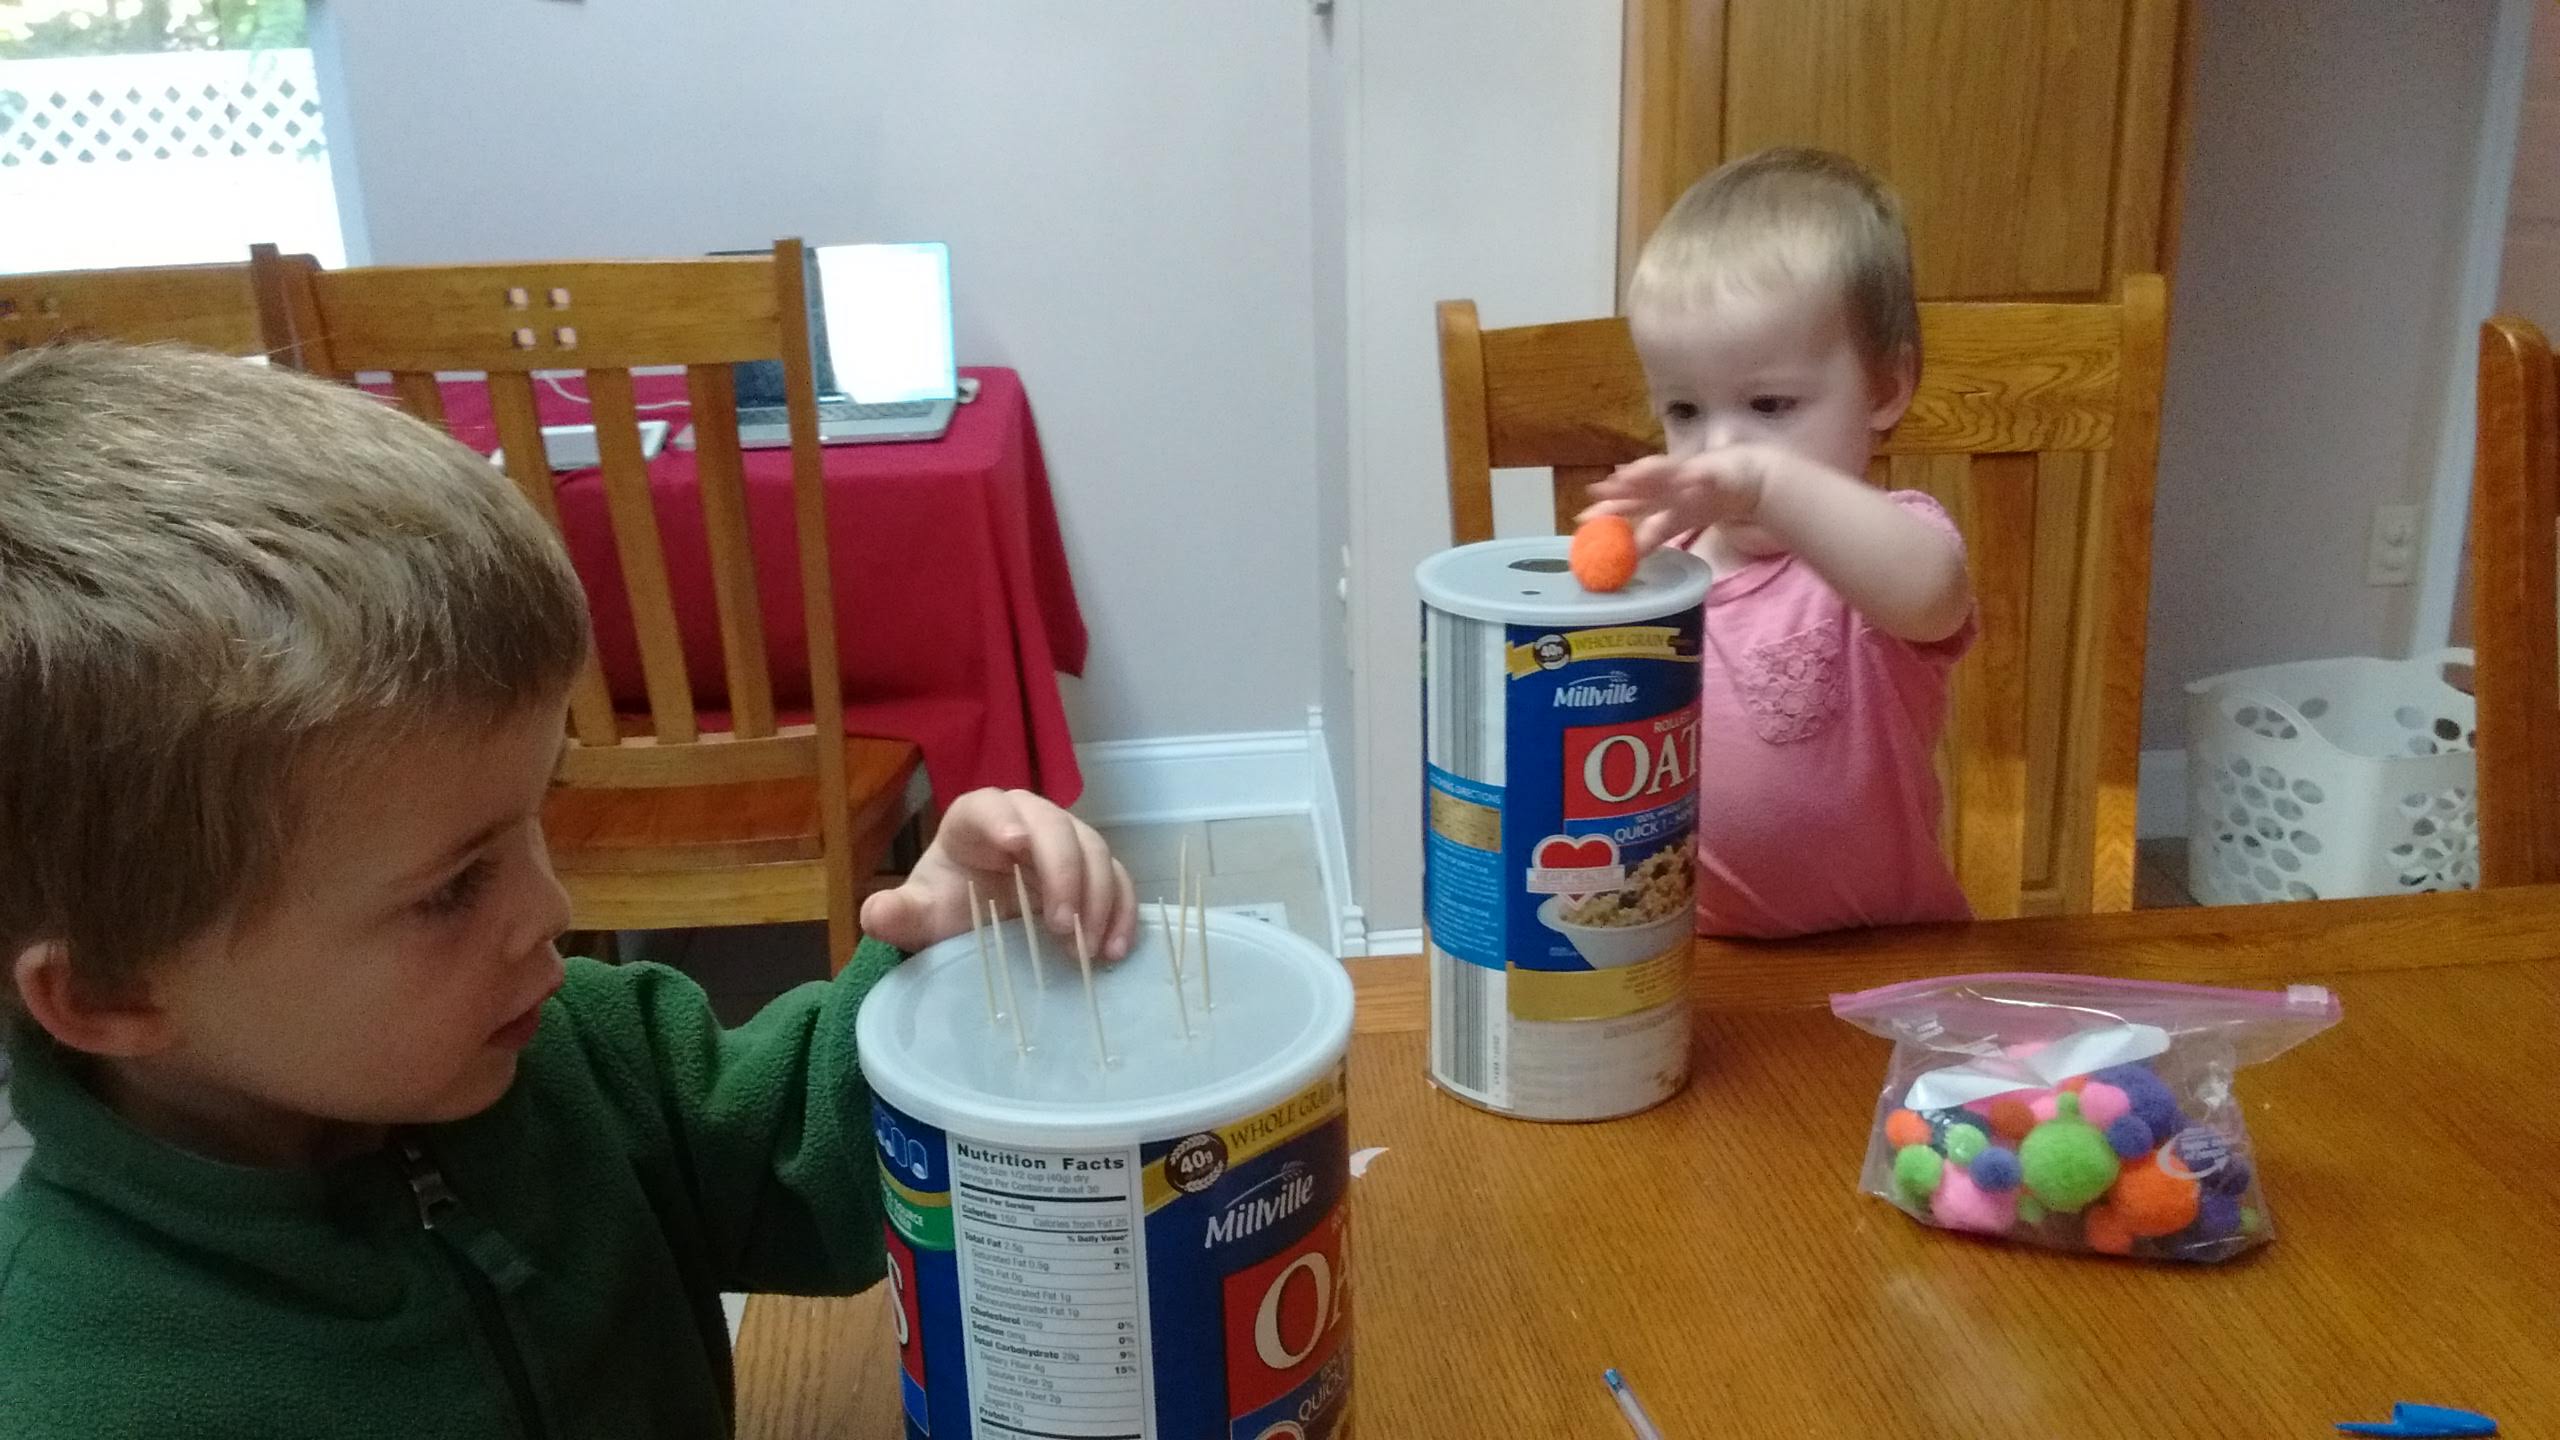 preschooler putting toothpicks in oats jar with pinholes cut and a baby putting pom pom in holes